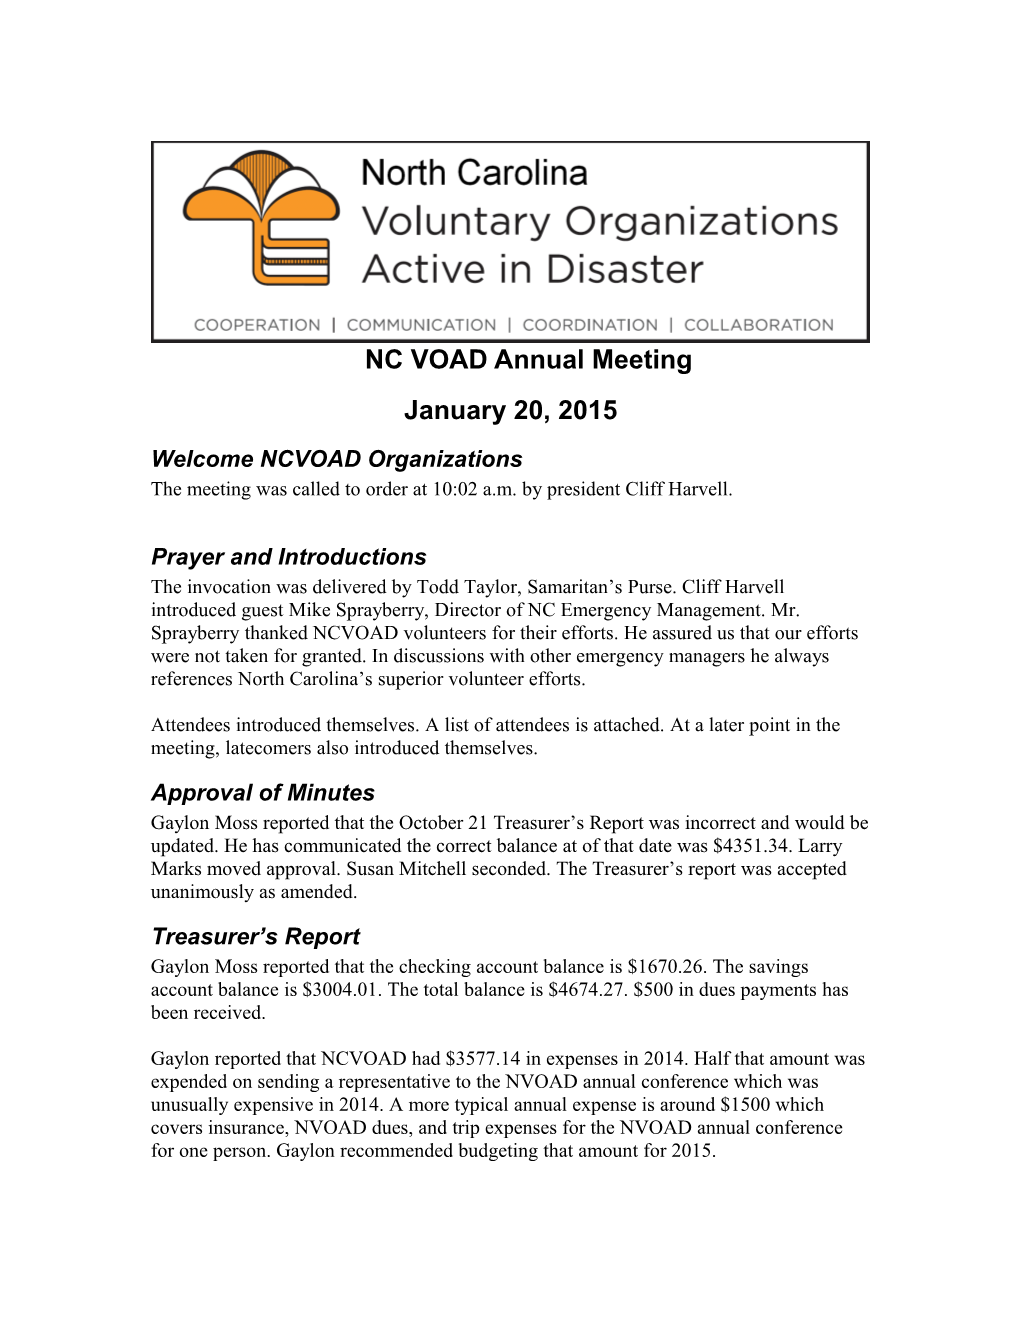 NC VOAD Annual Meeting